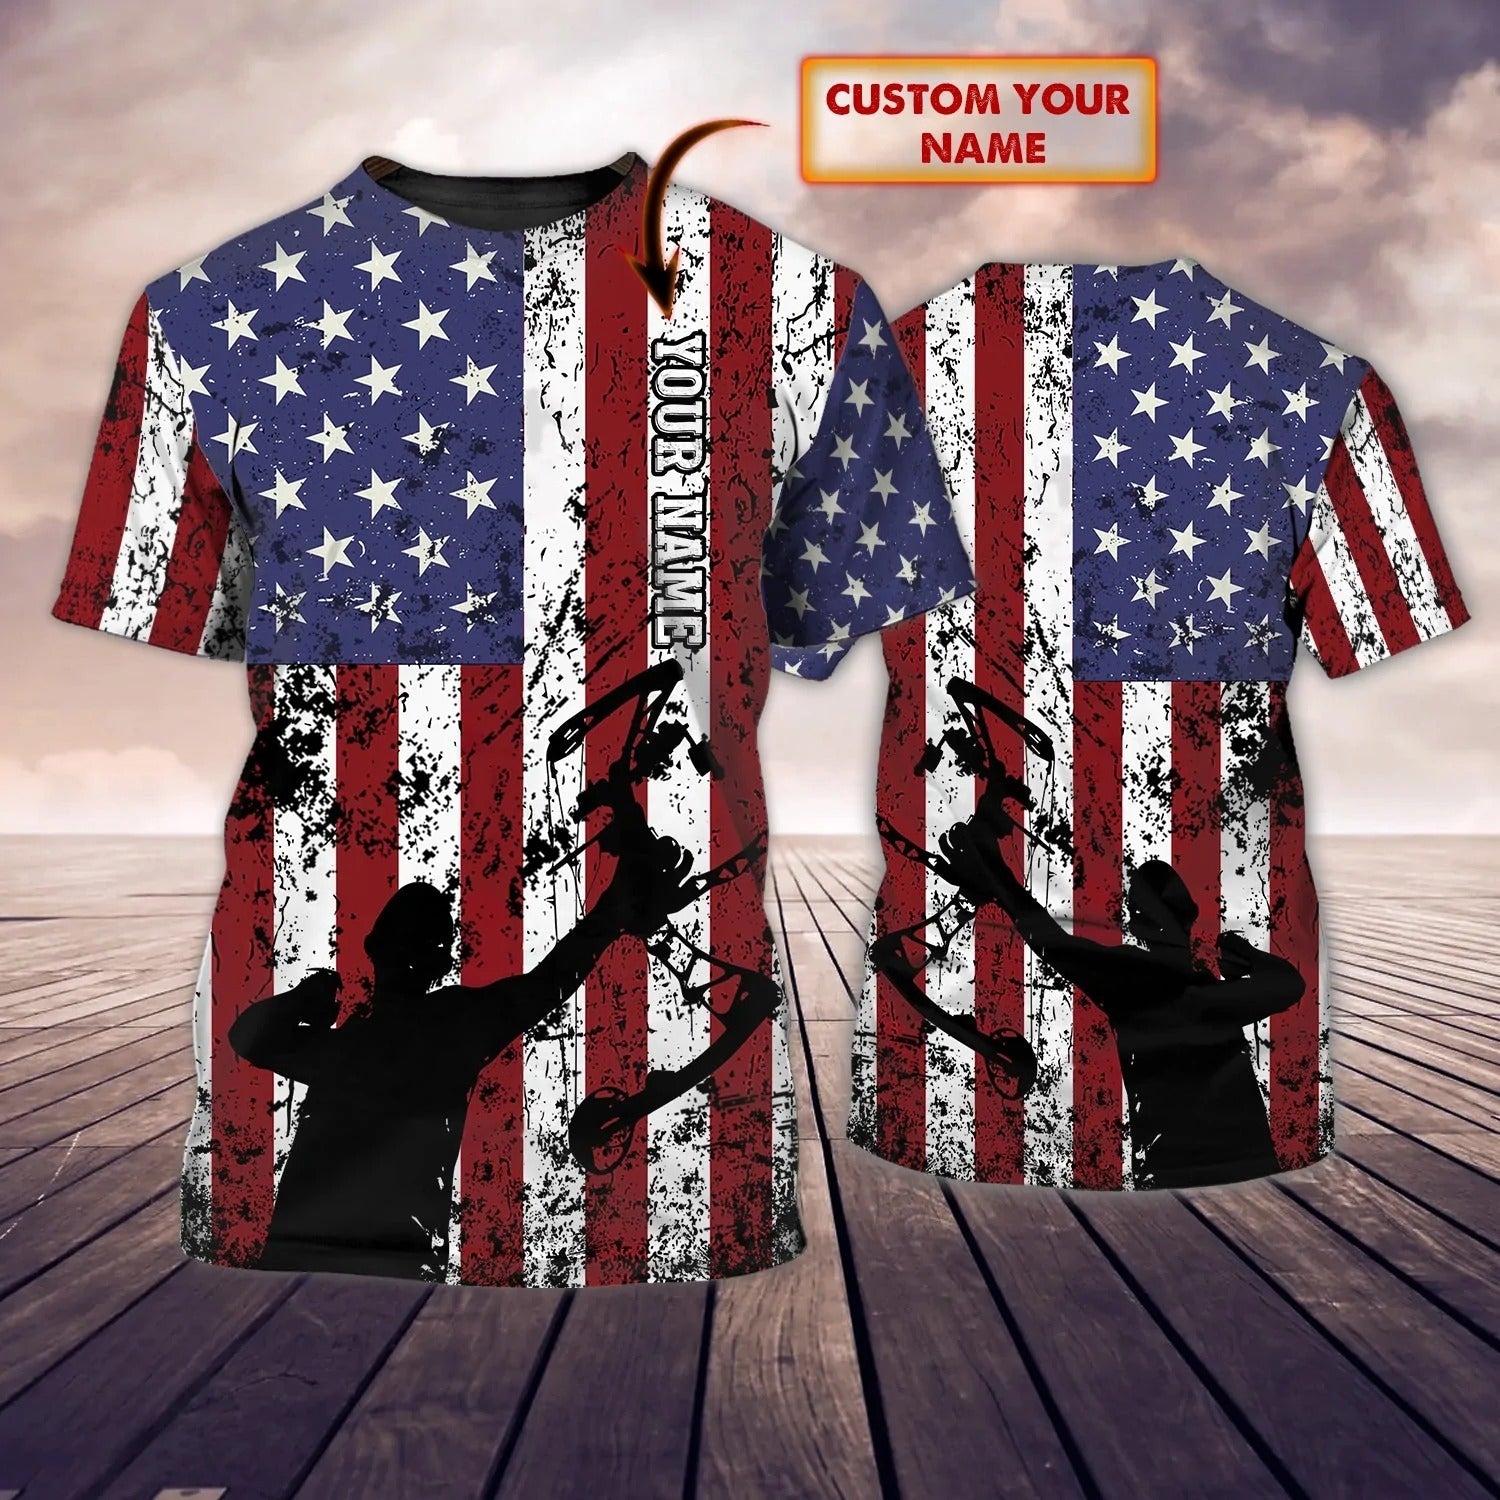 Personalized Archery Shirt American Flag Pattern 3D All Over Printed Archery Player Team Uniform Shirts